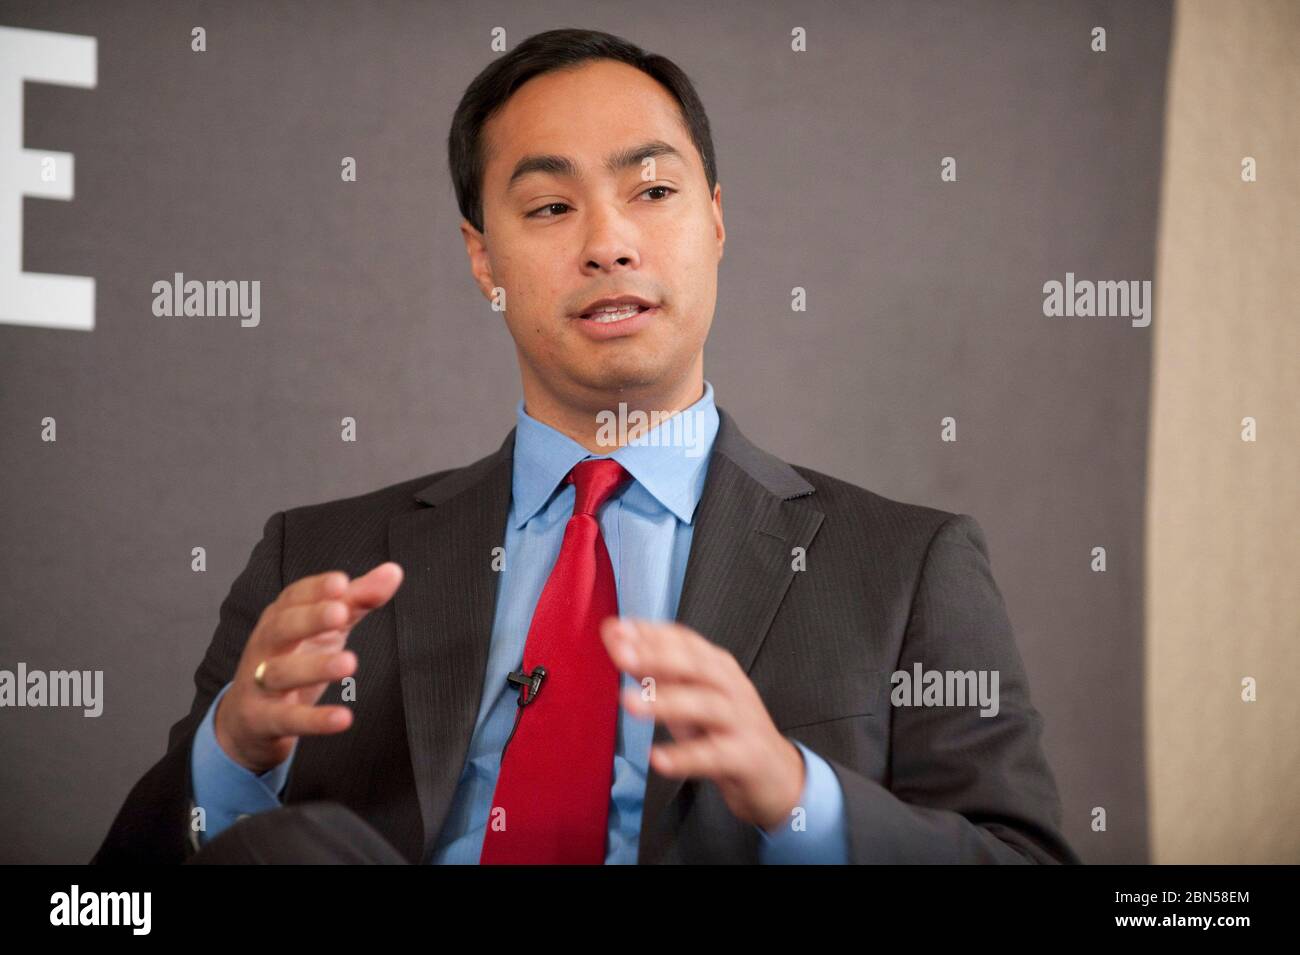 Austin Texas USA, December 1 2011: Hispanic politician Joaquin Castro of San Antonio speaks at a Texas Tribune event. the Stanford and Harvard educated Castro, 37, has announced his intentions to run for United State Senate in 2012. His twin brother, Julian, is the mayor of San Antonio. ©Bob Daemmrich Stock Photo